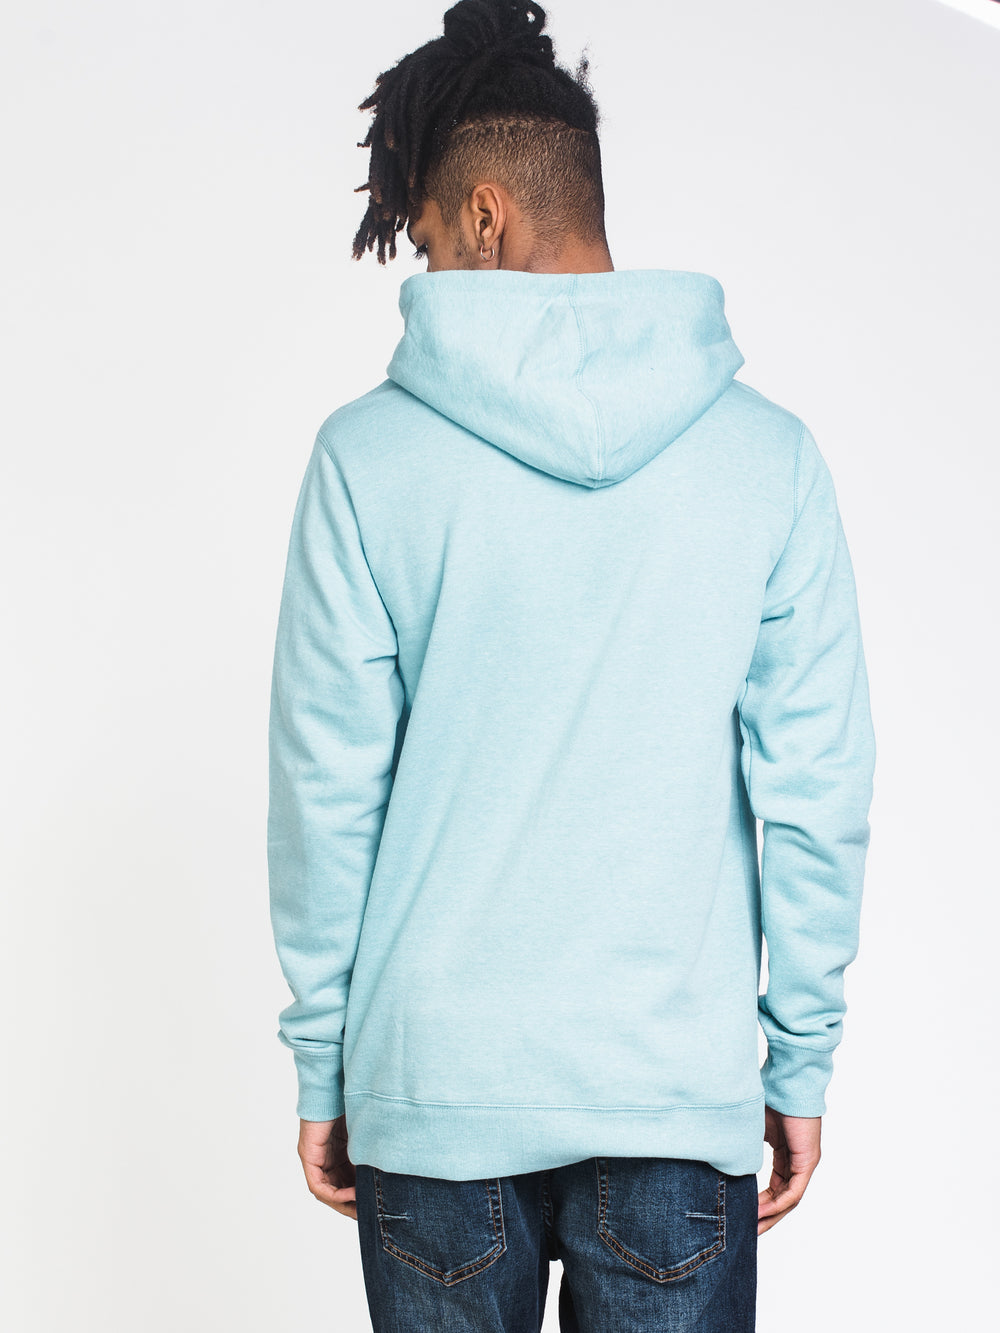 MENS ALL DAY PULLOVER HOODIE - BERMUDA - CLEARANCE